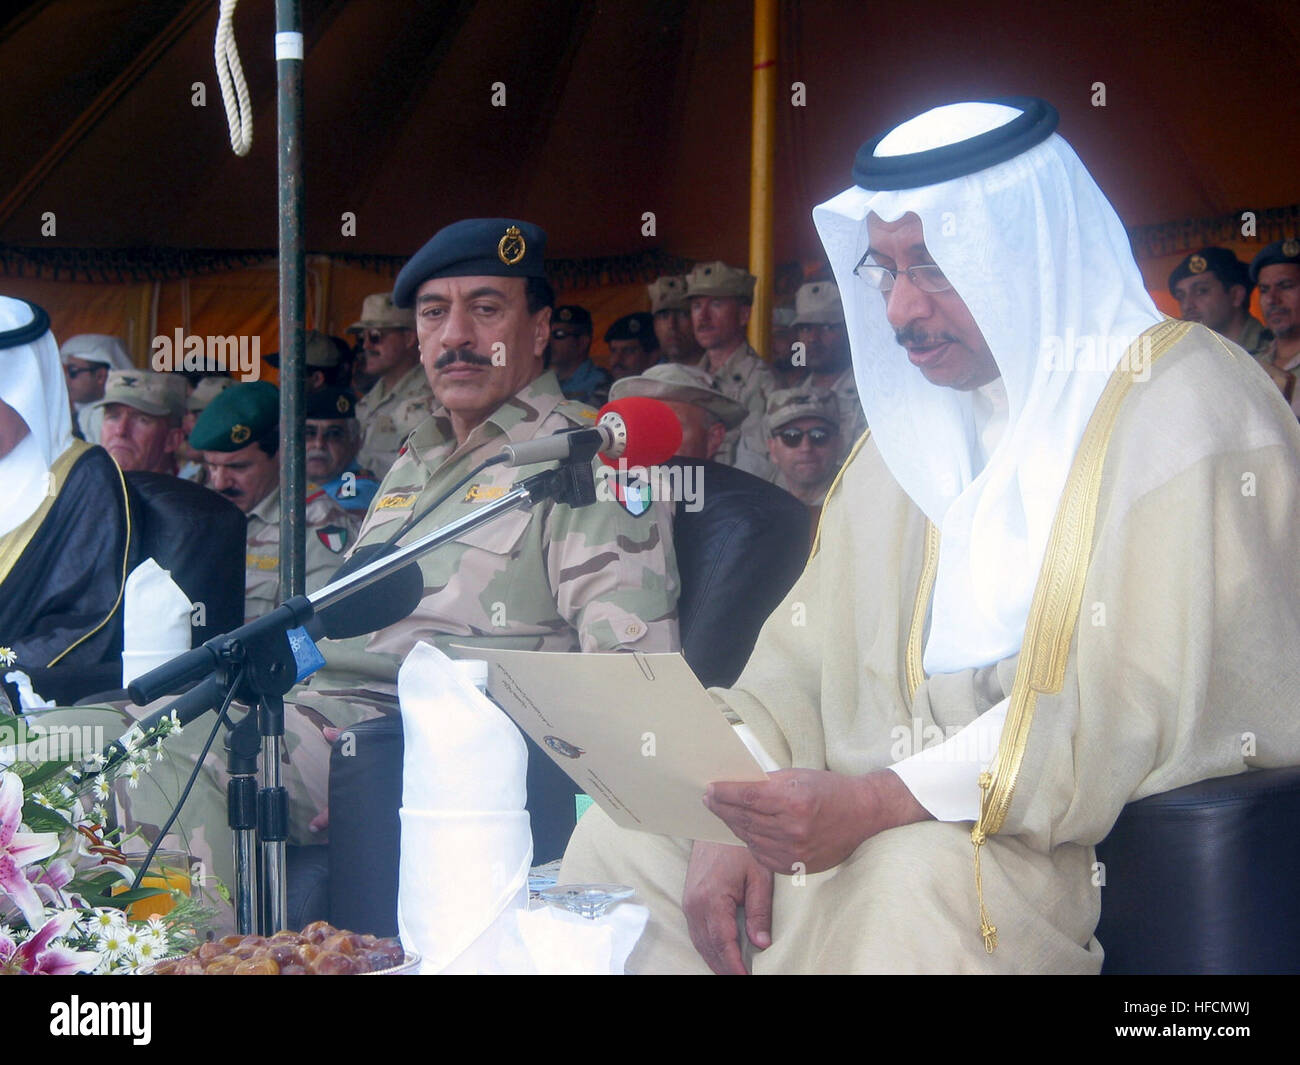 030507-N-1050K-019  Camp Patriot, Kuwait (May 7, 2003) -- From left, Kuwait’s Armed forces Chief of Staff, Lt. Gen Fahad al-Amir listens to a speech by Kuwait’s Defense Minister Sheikh Jaber al-Mubarak al-Sabah during the Sheikh’s recent visit to Kuwait Naval Base and Camp Patriot.  Sheikh al-Sabah bid Gulf Country Council (GCC) troops participating in Peninsula Shield farewell and thanks during a brief visit and ceremony attended by hundreds of area commanders and troops from the GCC states as well as U.S., British and Australian military leaders. The GCC is made up of members from the nation Stock Photo